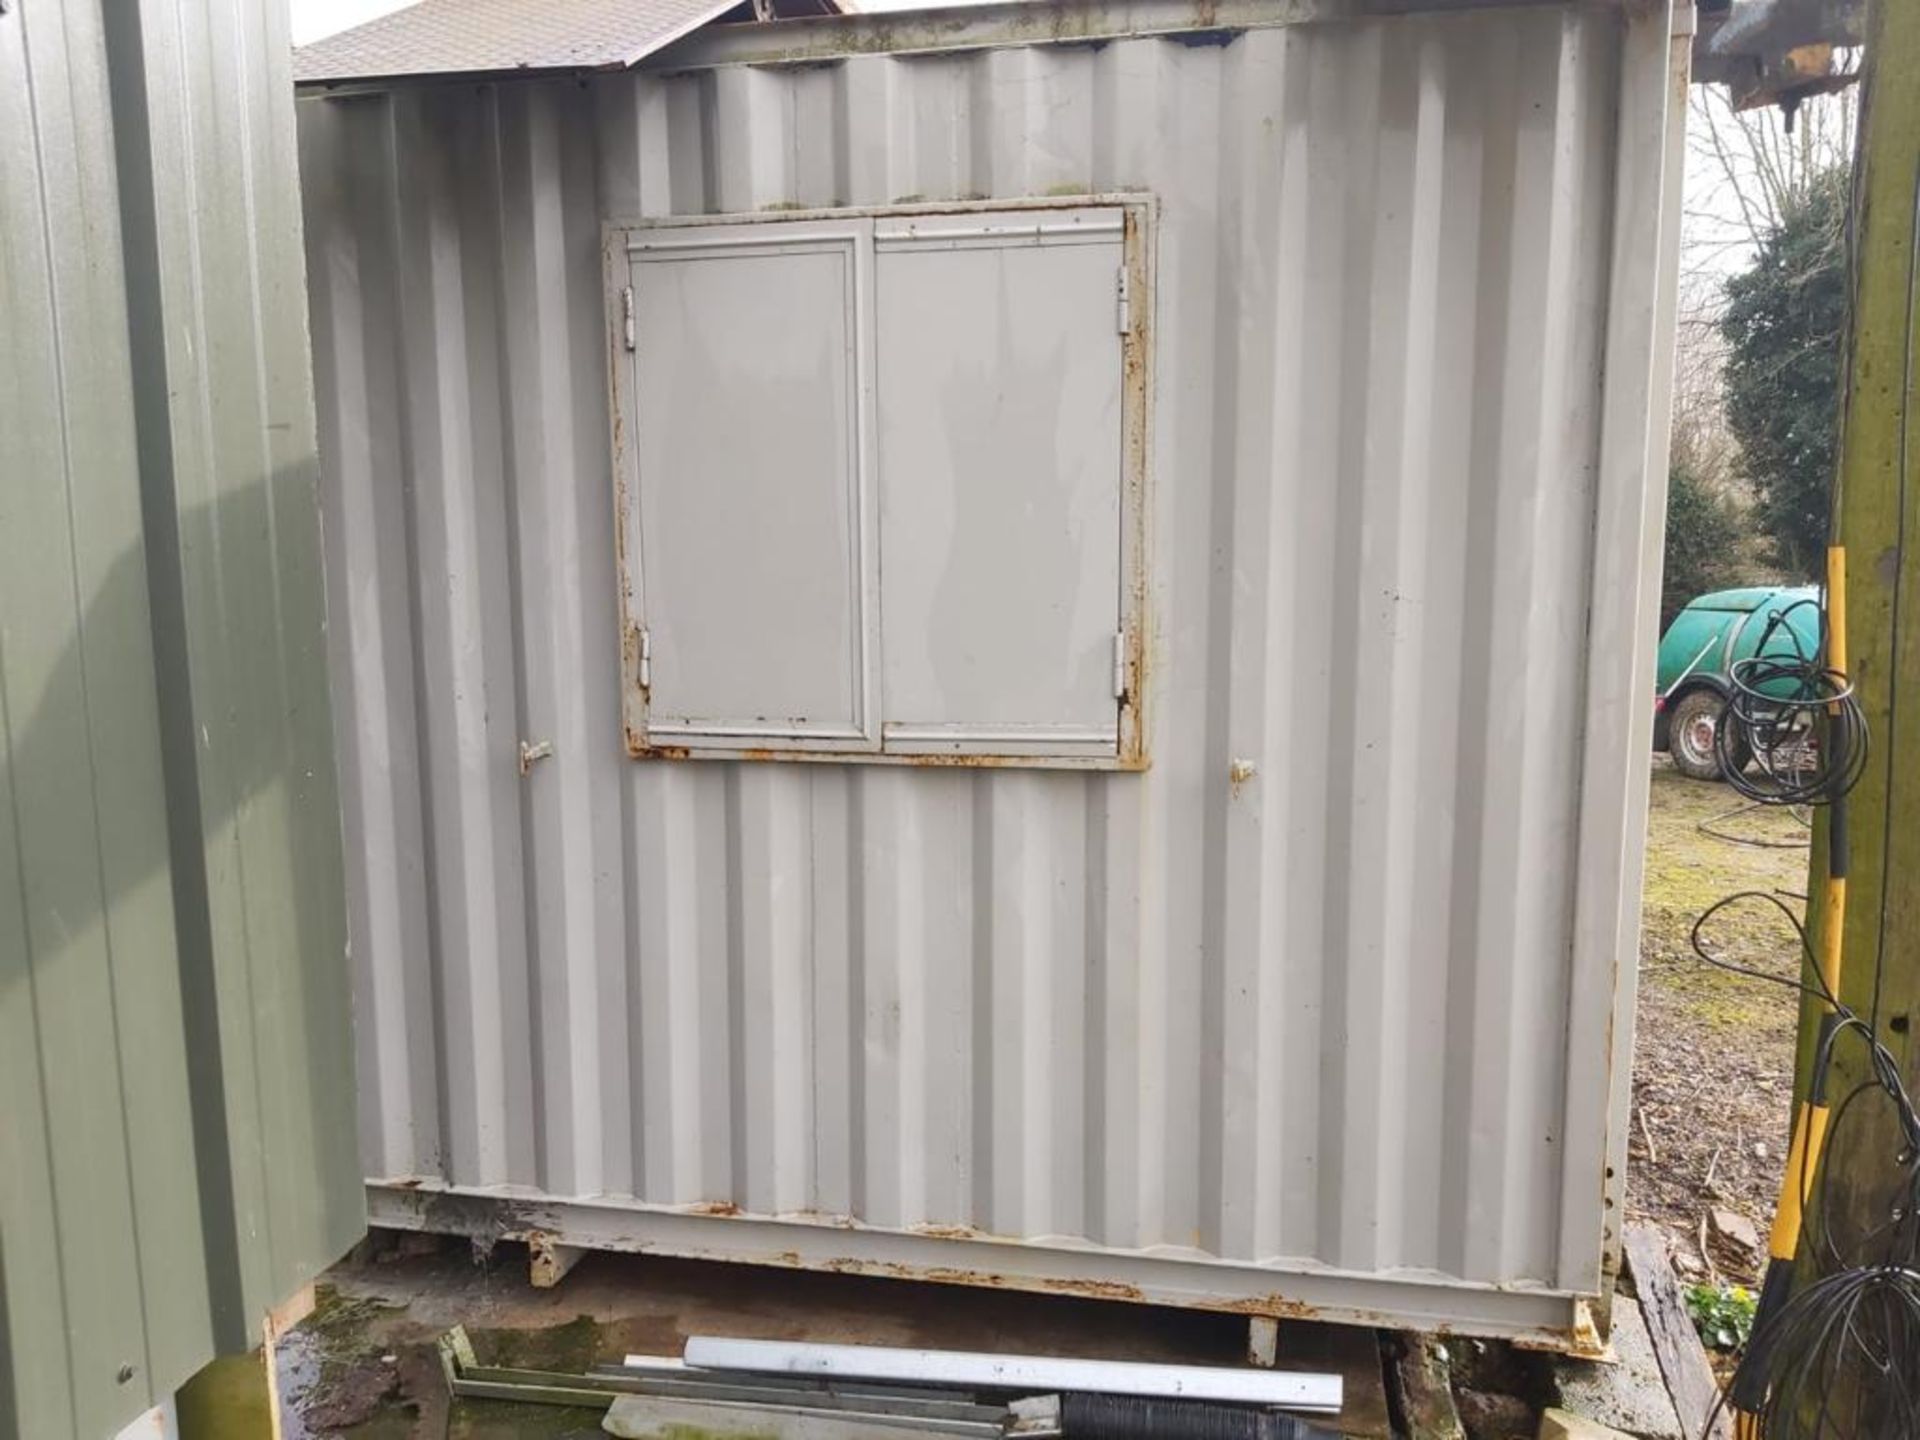 Self contained powered Kitchen Cabin with Toilet, Sink, Generator Water Storage 24x10 - Image 6 of 30